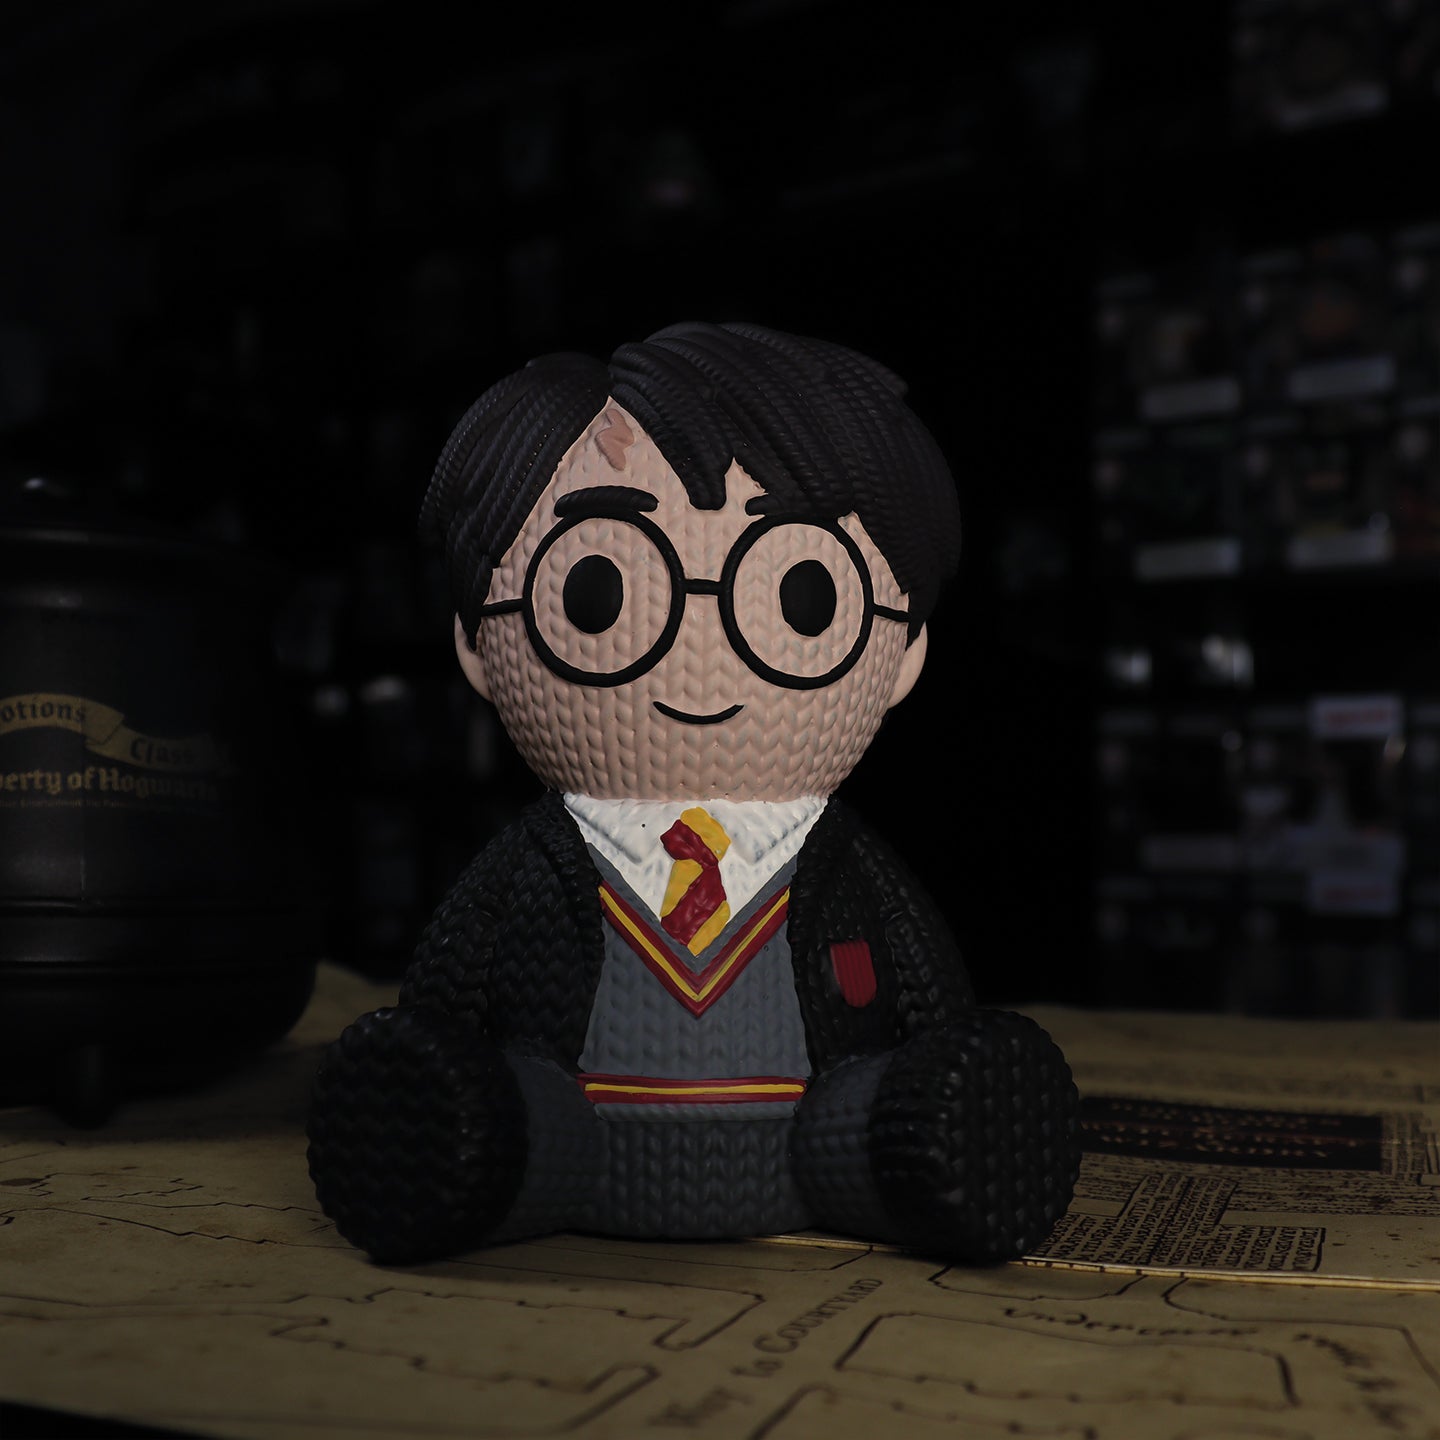 Harry Potter Collectible Vinyl Figure from Handmade By Robots